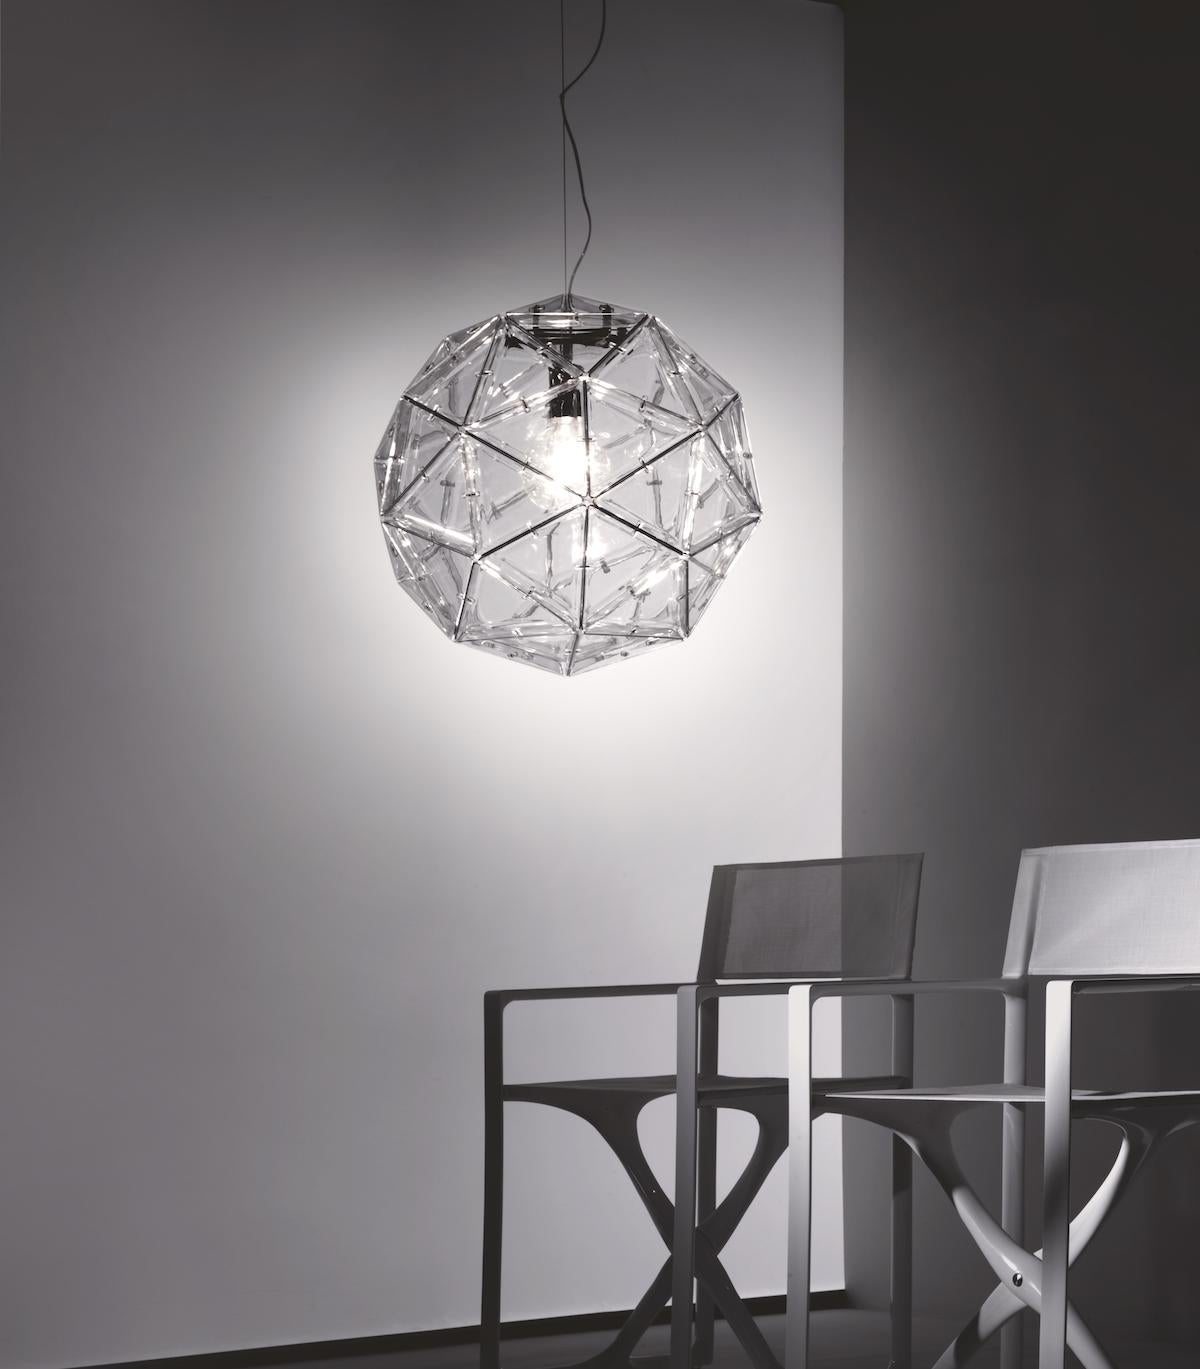 Poliedro 1722 pendant light by Elio Martinelli.

Technical specifications:
Materials:
Structure: Metal
Diffuser: Methacrylate

LED: 1x6W E27 
Flux: 600Lm 
Kelvin: 3000°
Class A+
CRI: >80
Duration: 30000h.

Device specifications:
Type